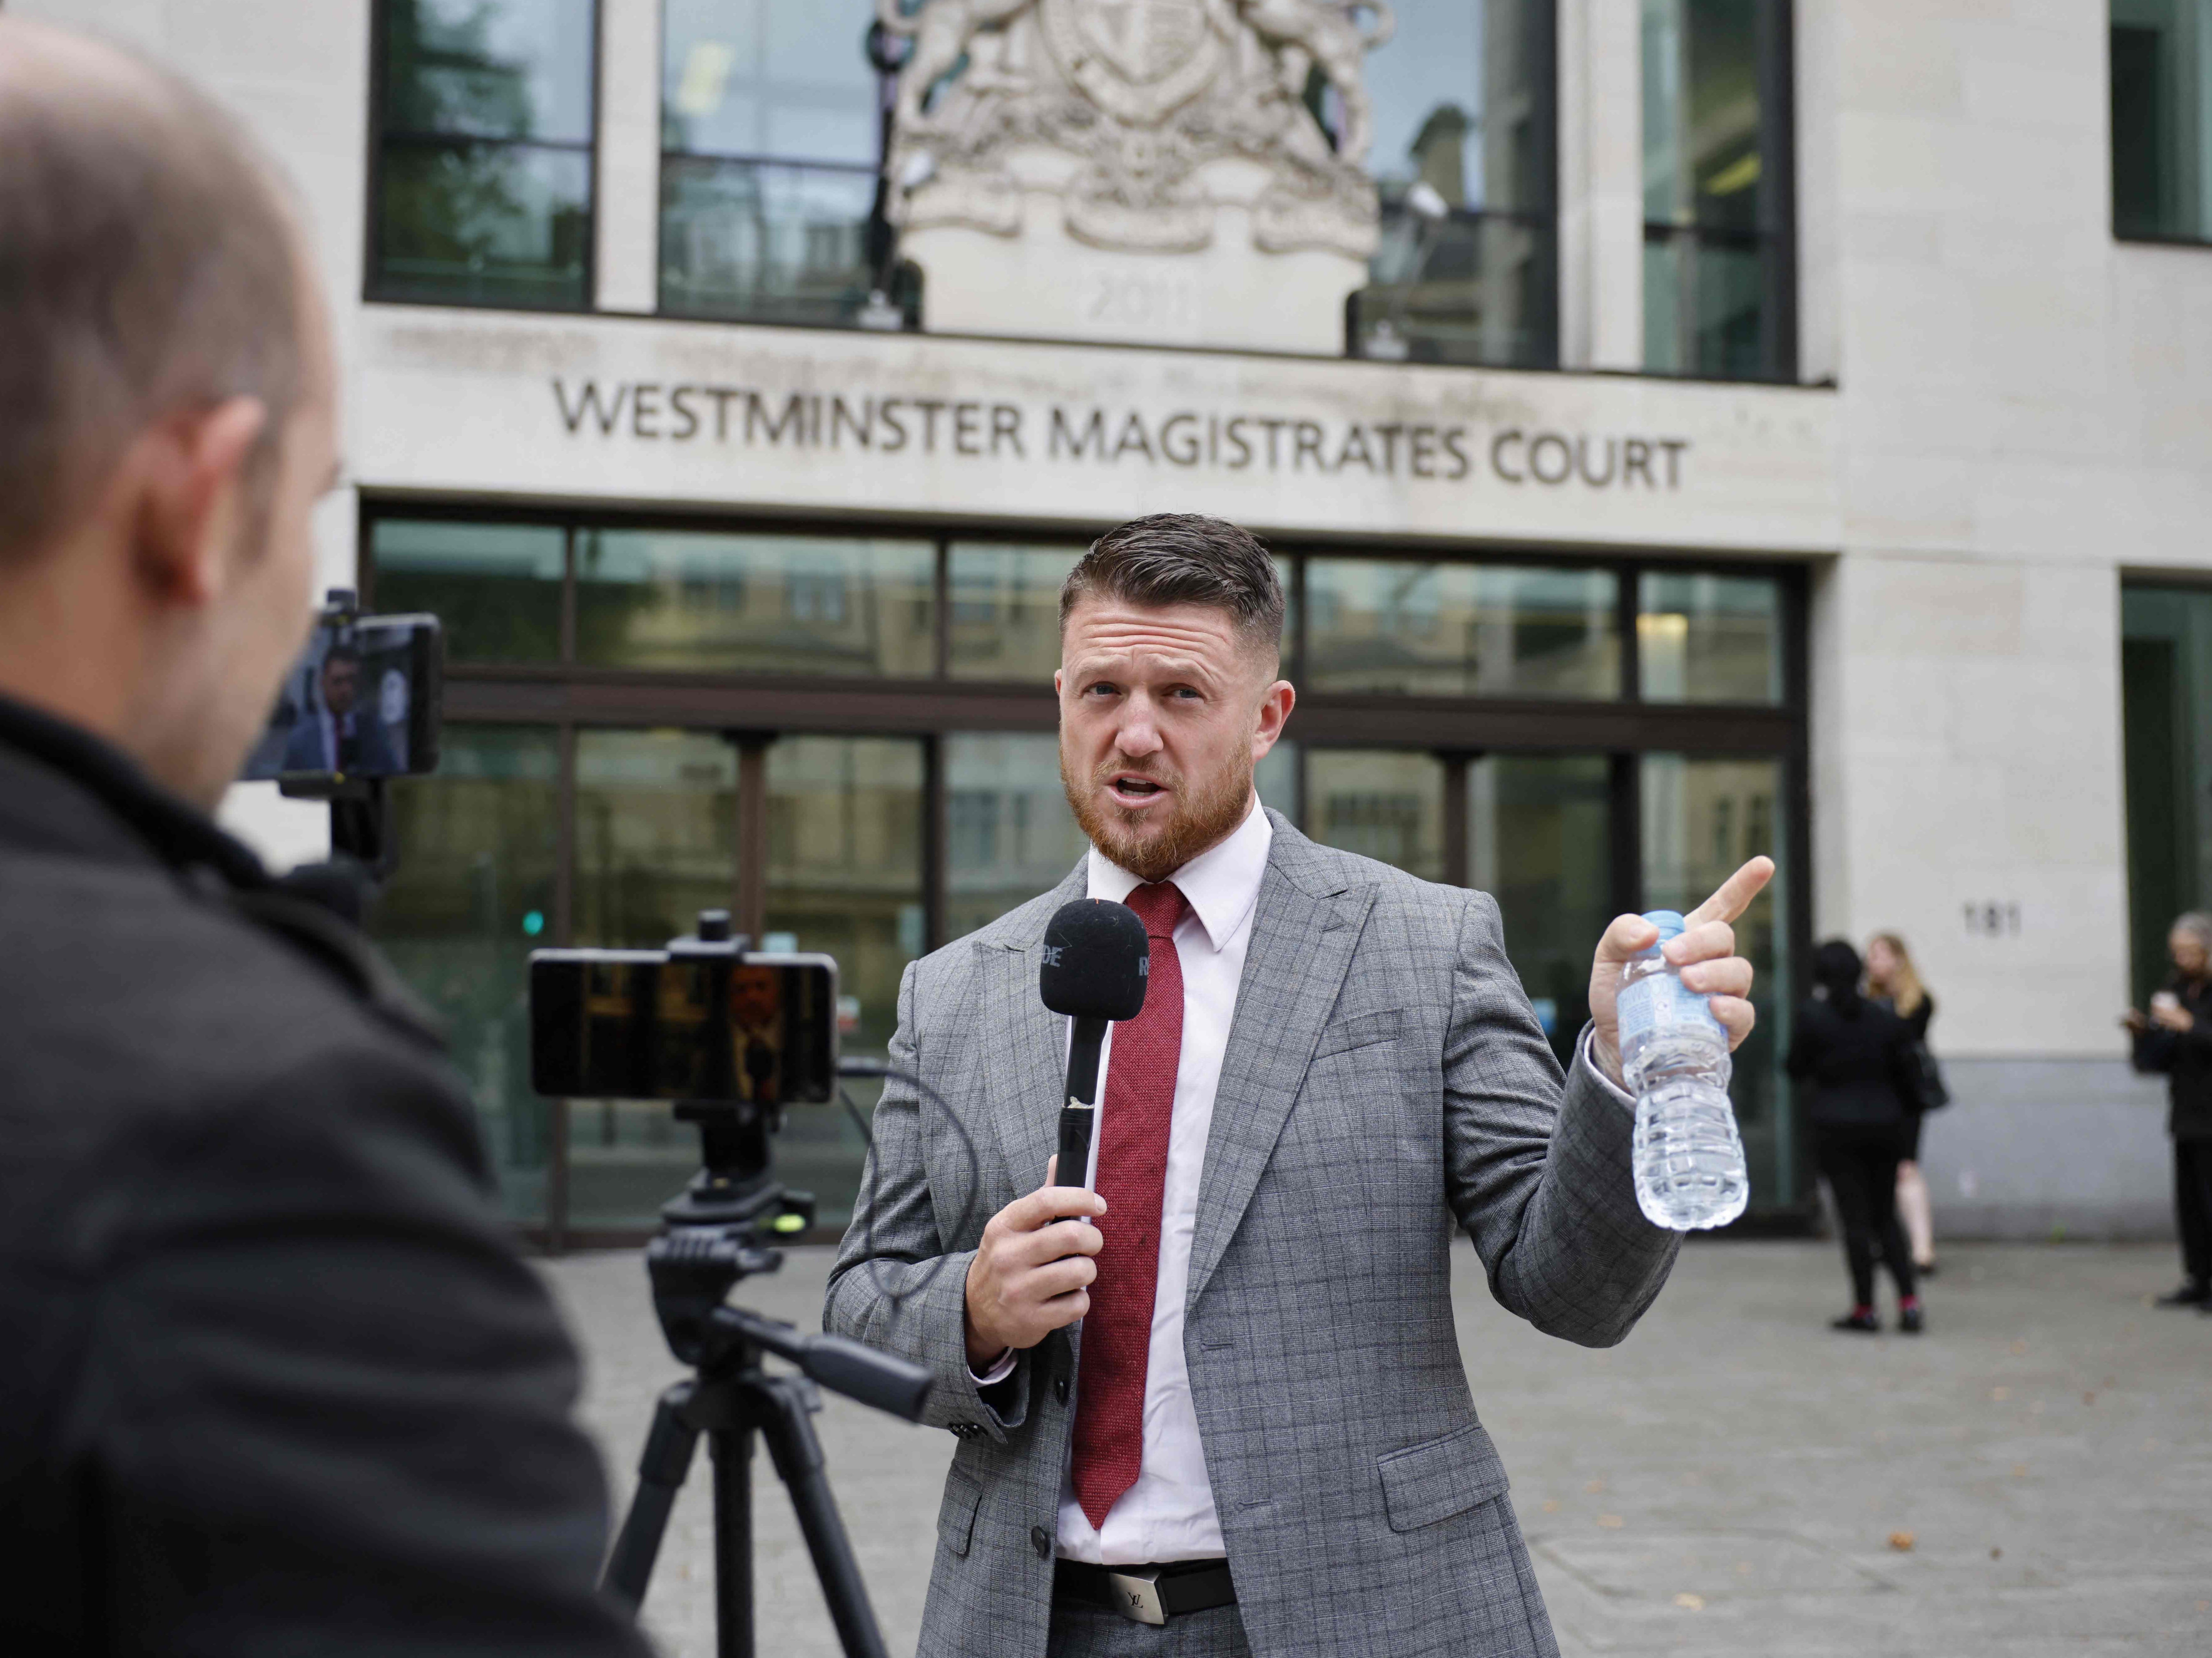 English Defence League founder Tommy Robinson, whose real name is Stephen Yaxley-Lennon, speaks to media outside Westminster Magistrates’ Court